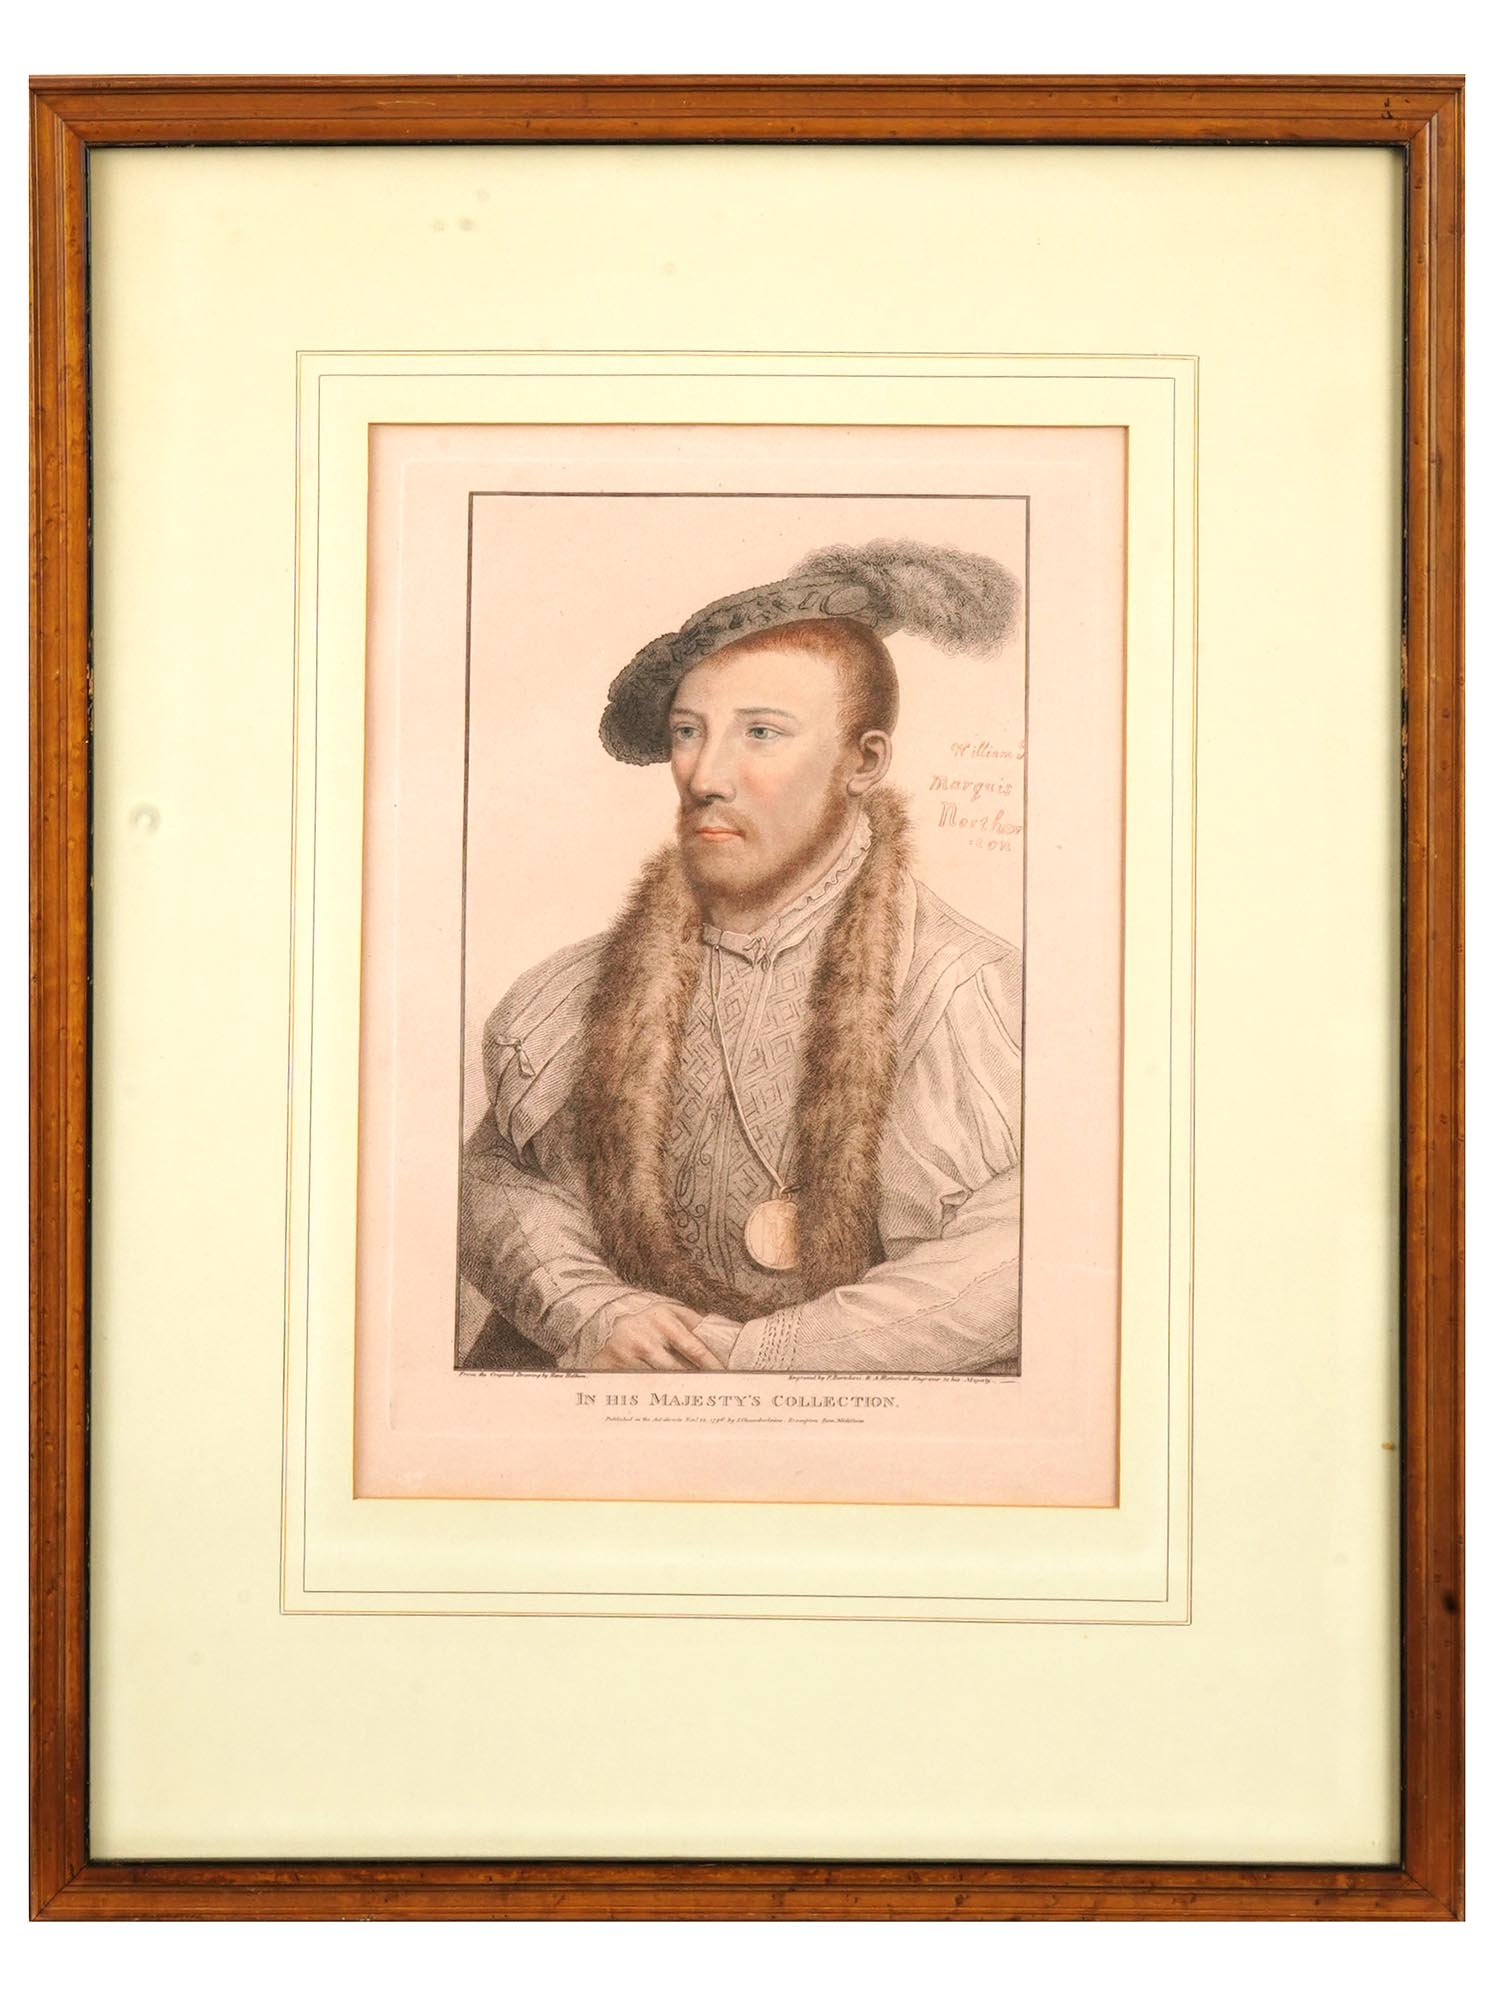 ANTIQUE WILLIAM PARR ENGRAVING AFTER HANS HOLBEIN